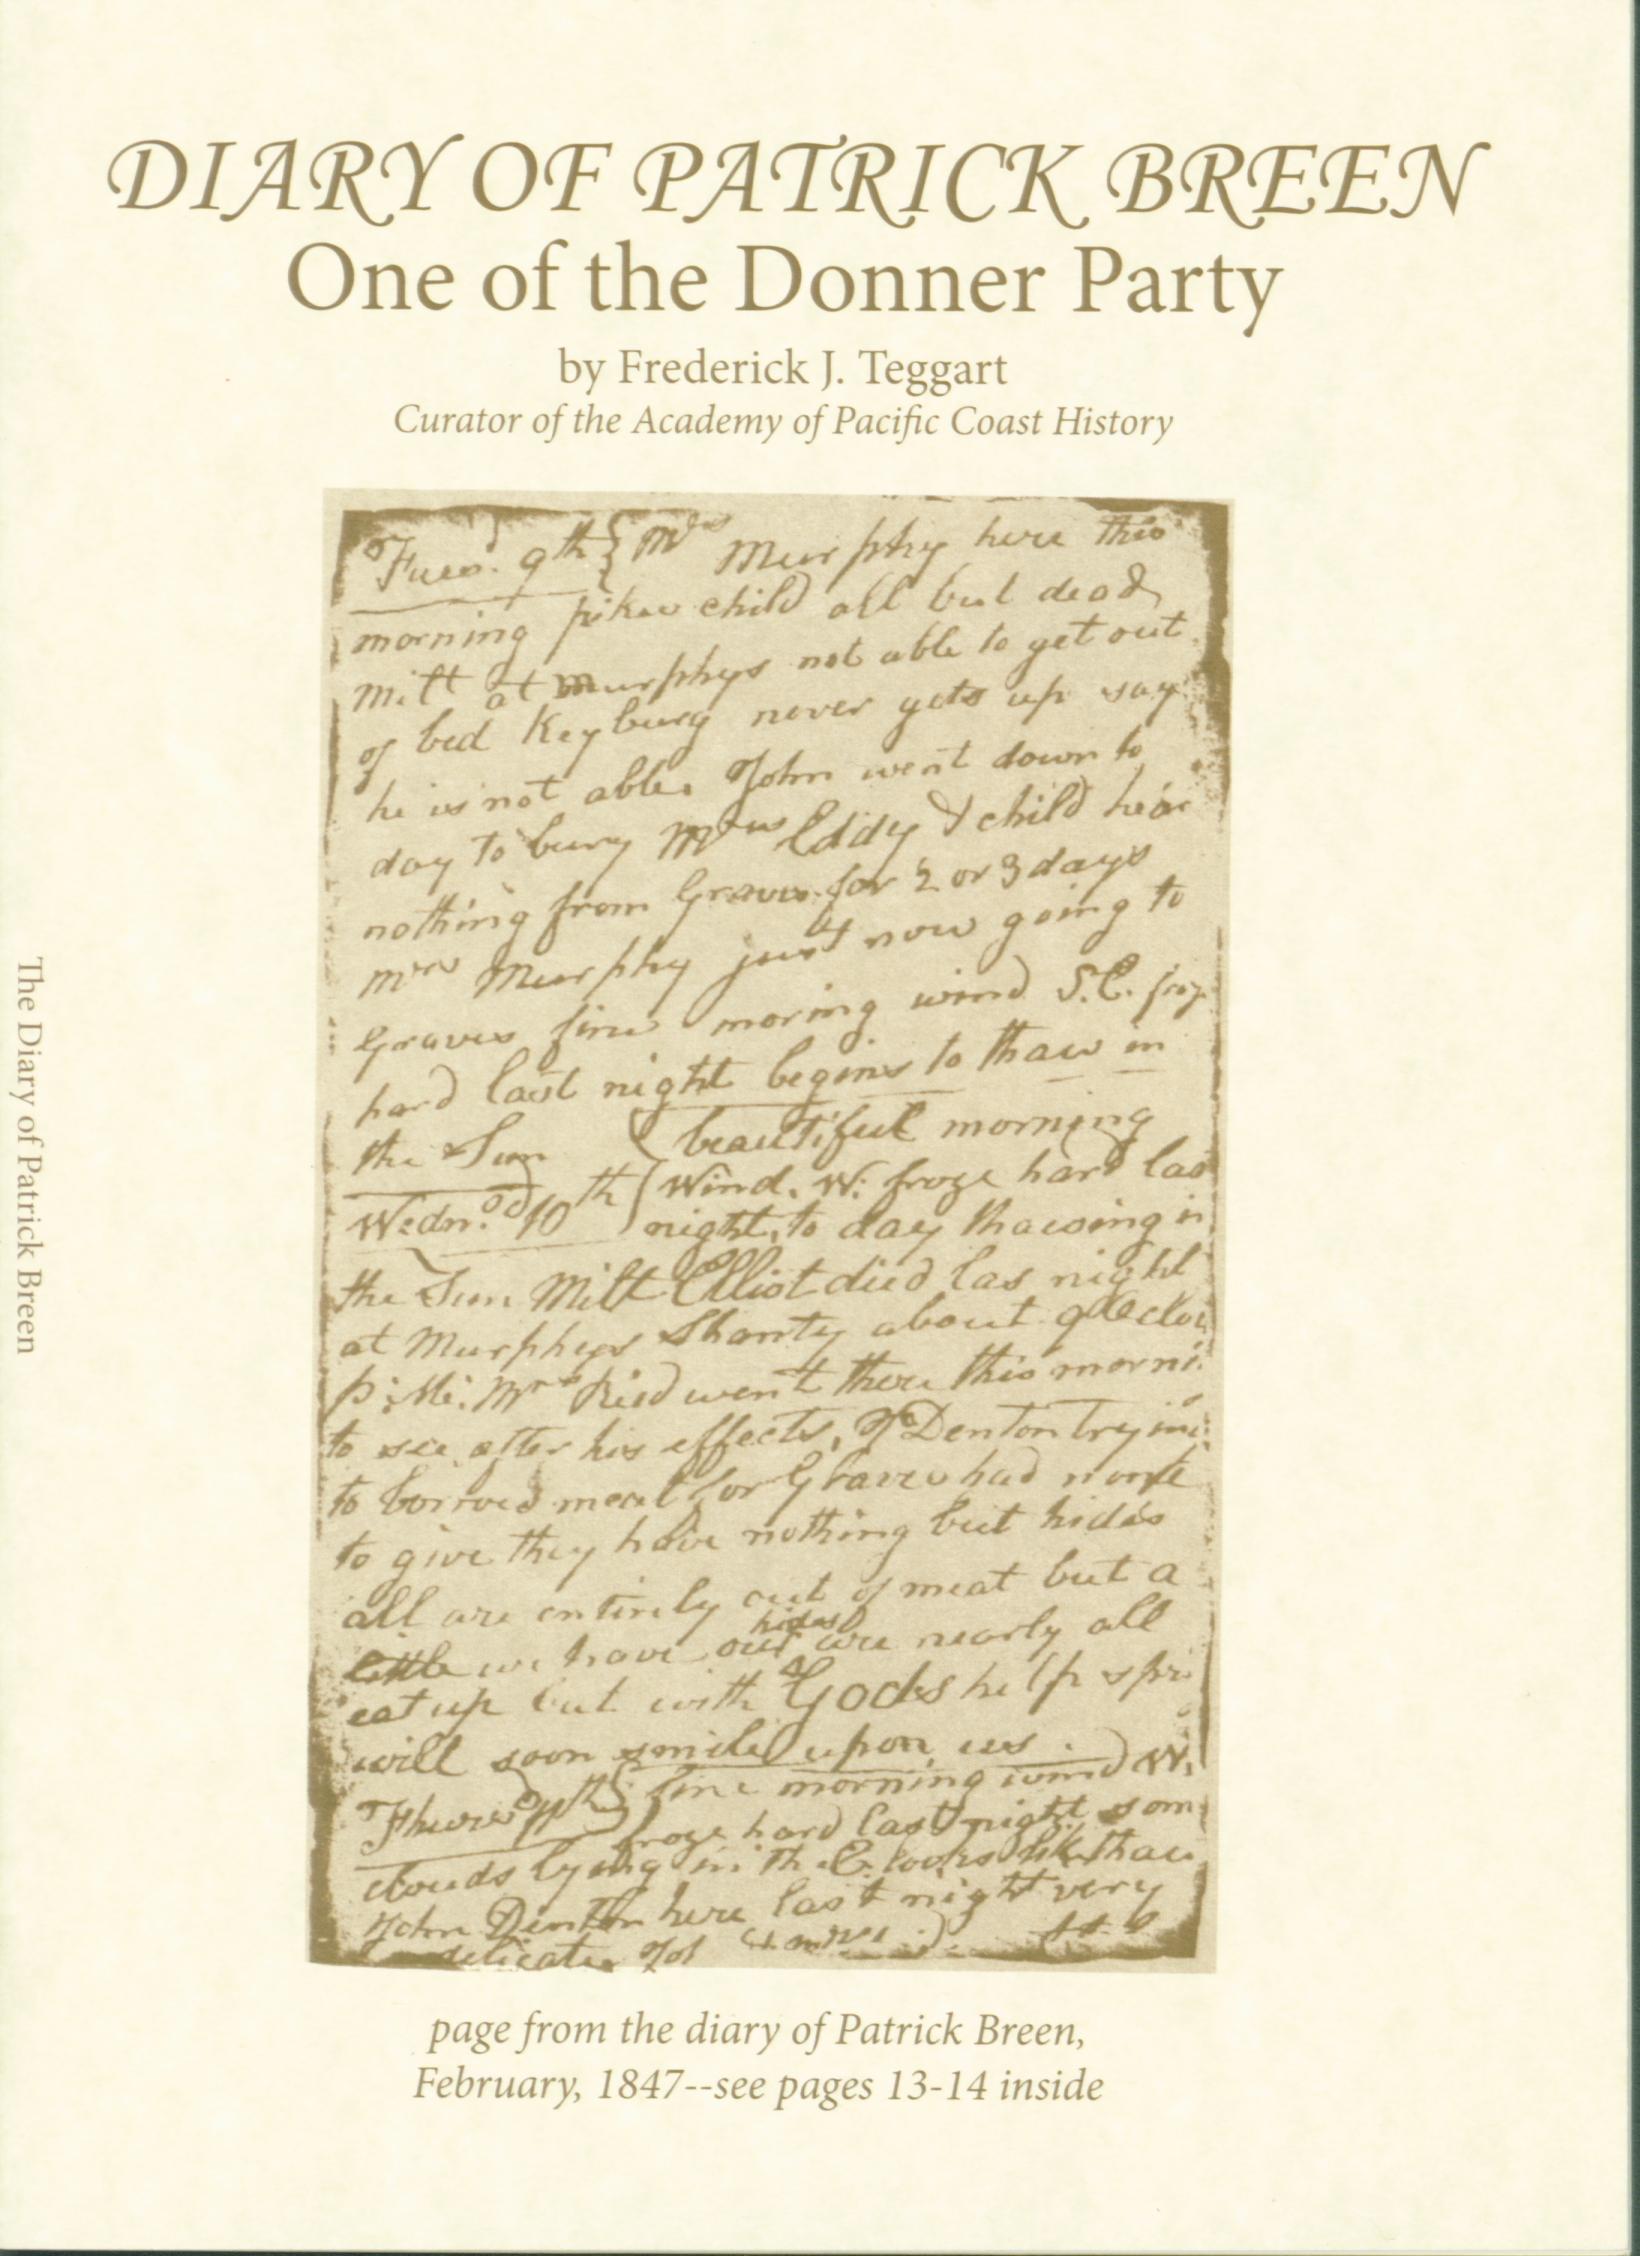 THE DIARY OF PATRICK BREEN: one of the Donner Party. by Frederick J. Teggart.